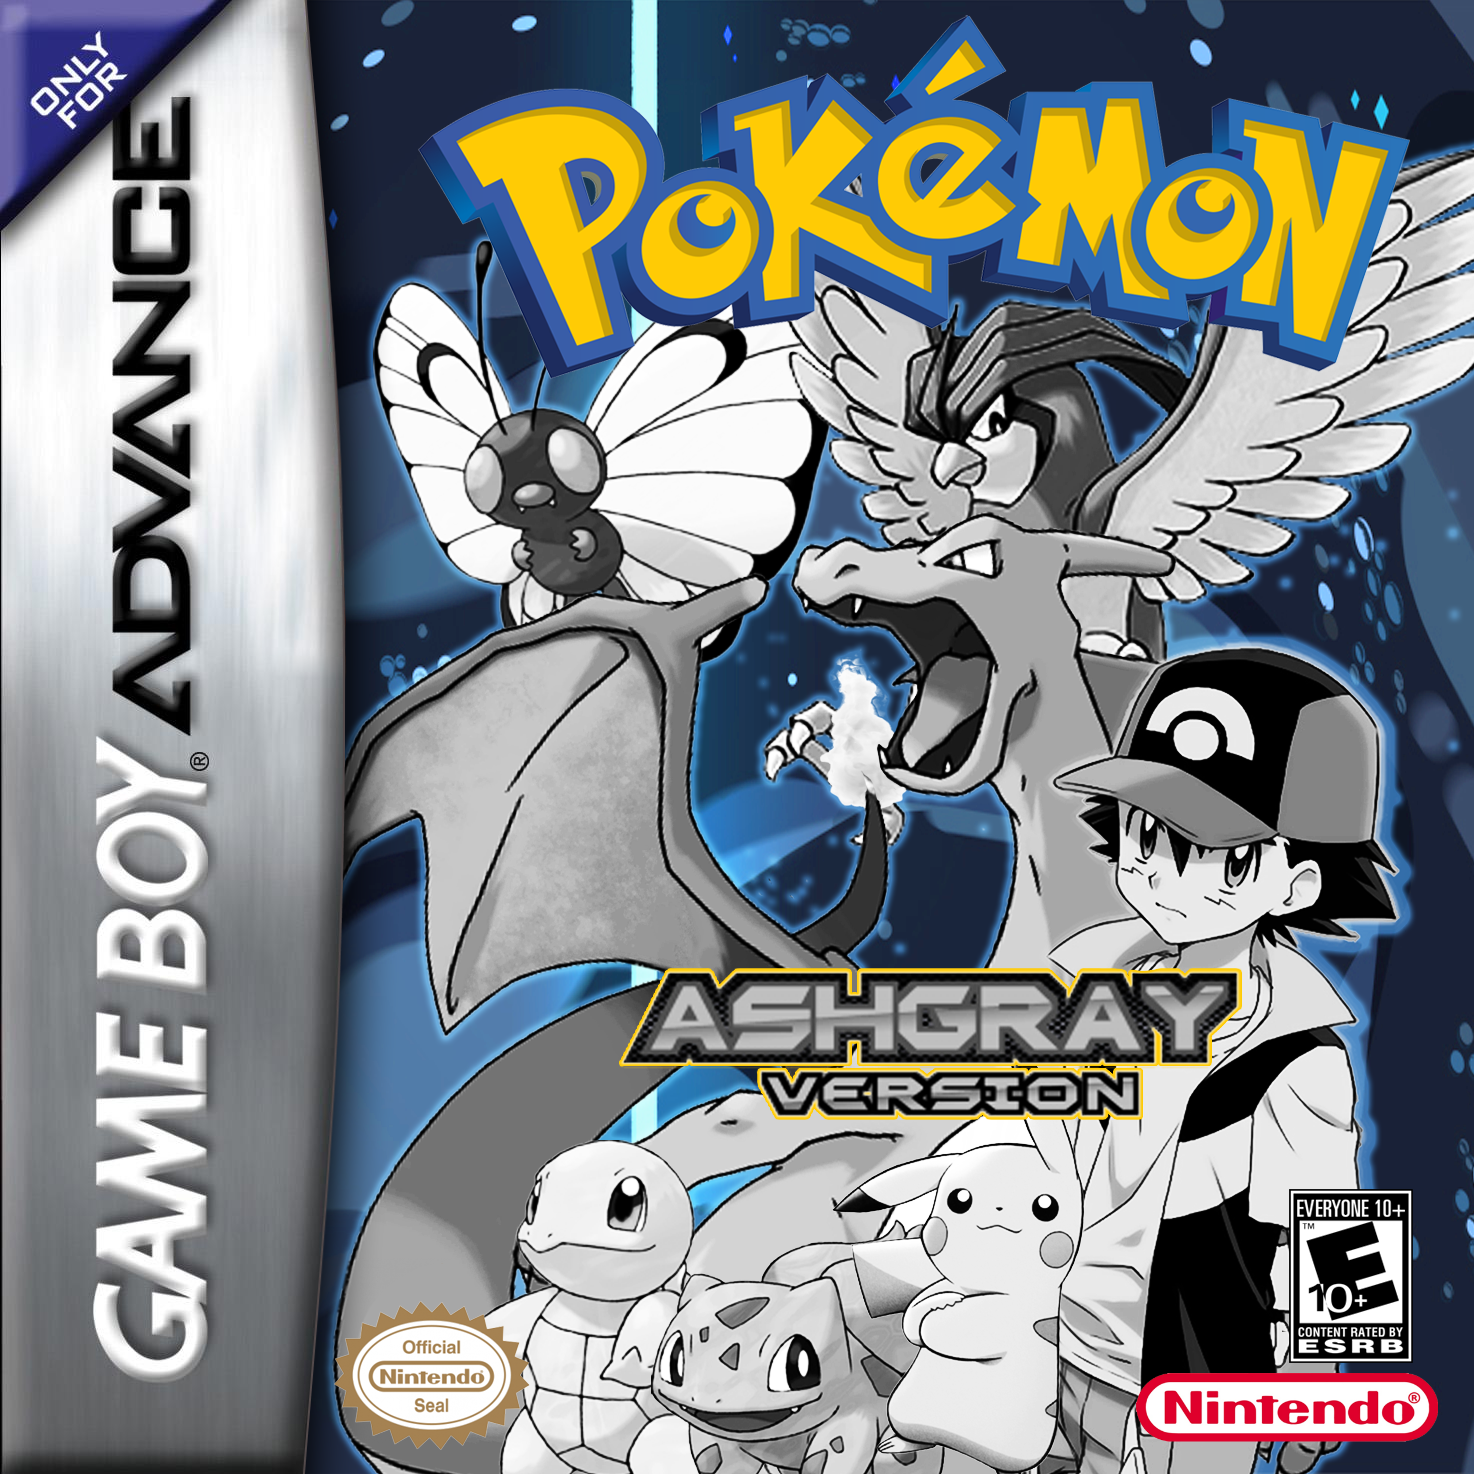 Viewing full size Pókemon Ash Gray box cover